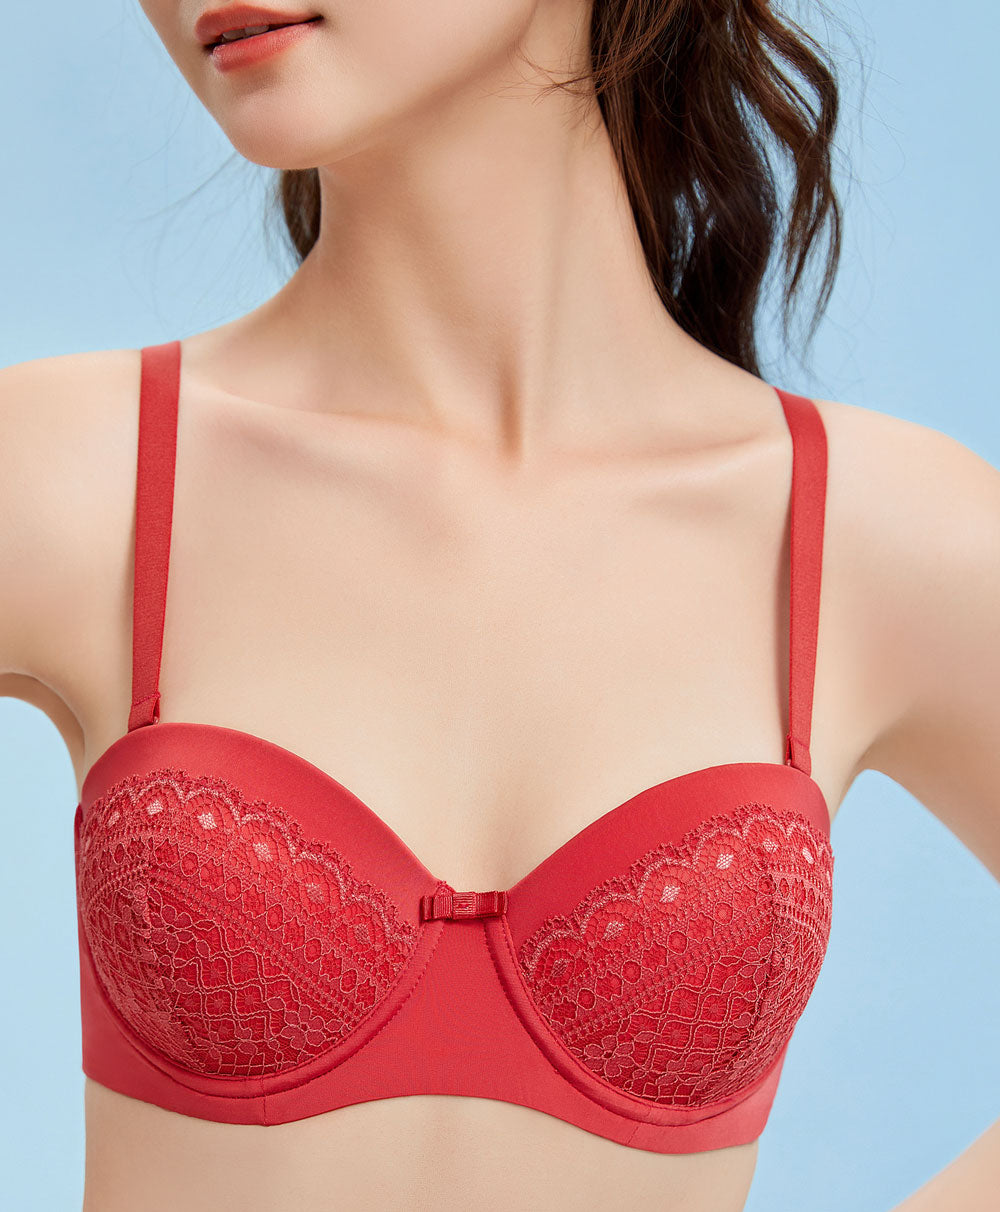 Avon - Product Detail : Dawn Underwire Full Cup Lace Bra